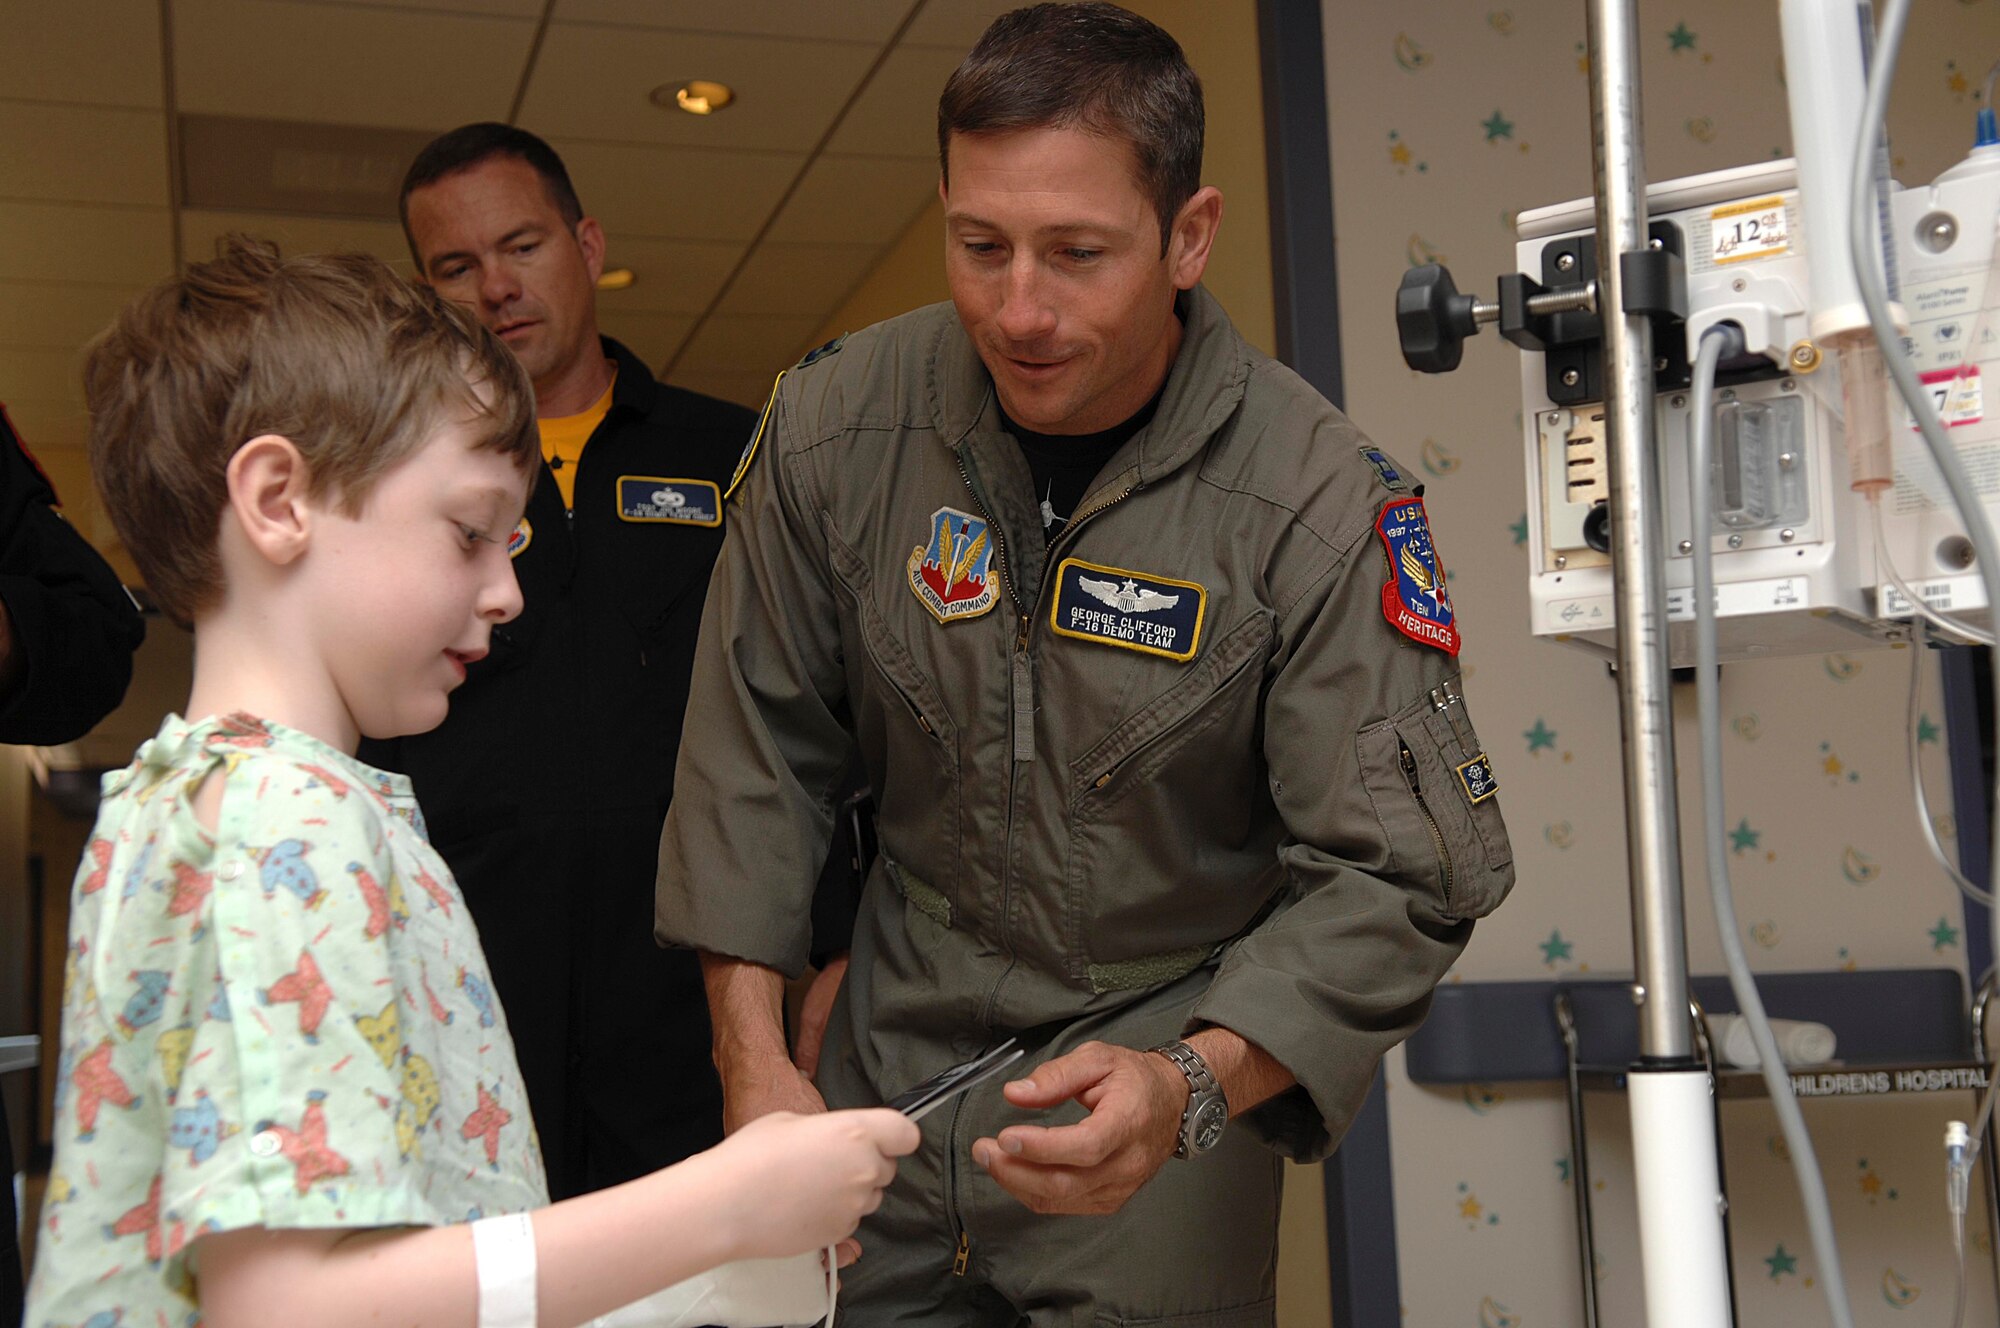 FLORENCE, S.C.-- Capt. George Clifford, F-16 Viper East Demonstration Team pilot, gives 7-year-old Luca Ammirati, son of Emily Ammirati, Viper East stickers and coloring booklet at McLeod Regional Medical Center May 22. Tech. Sgt. Joe Moore, Viper East team chief, looks on from the background. The 20th Fighter Wing at Shaw Air Force Base, S.C., is home to the Viper East Demonstration Team, one of two single-ship, F-16 aerial demonstration teams in Air Combat Command. The 338th FW at Hill AFB, Utah, is home to the Viper West Coast Demonstration Team.(U.S. Air Force photo/Staff Sgt. Nathan Bevier)